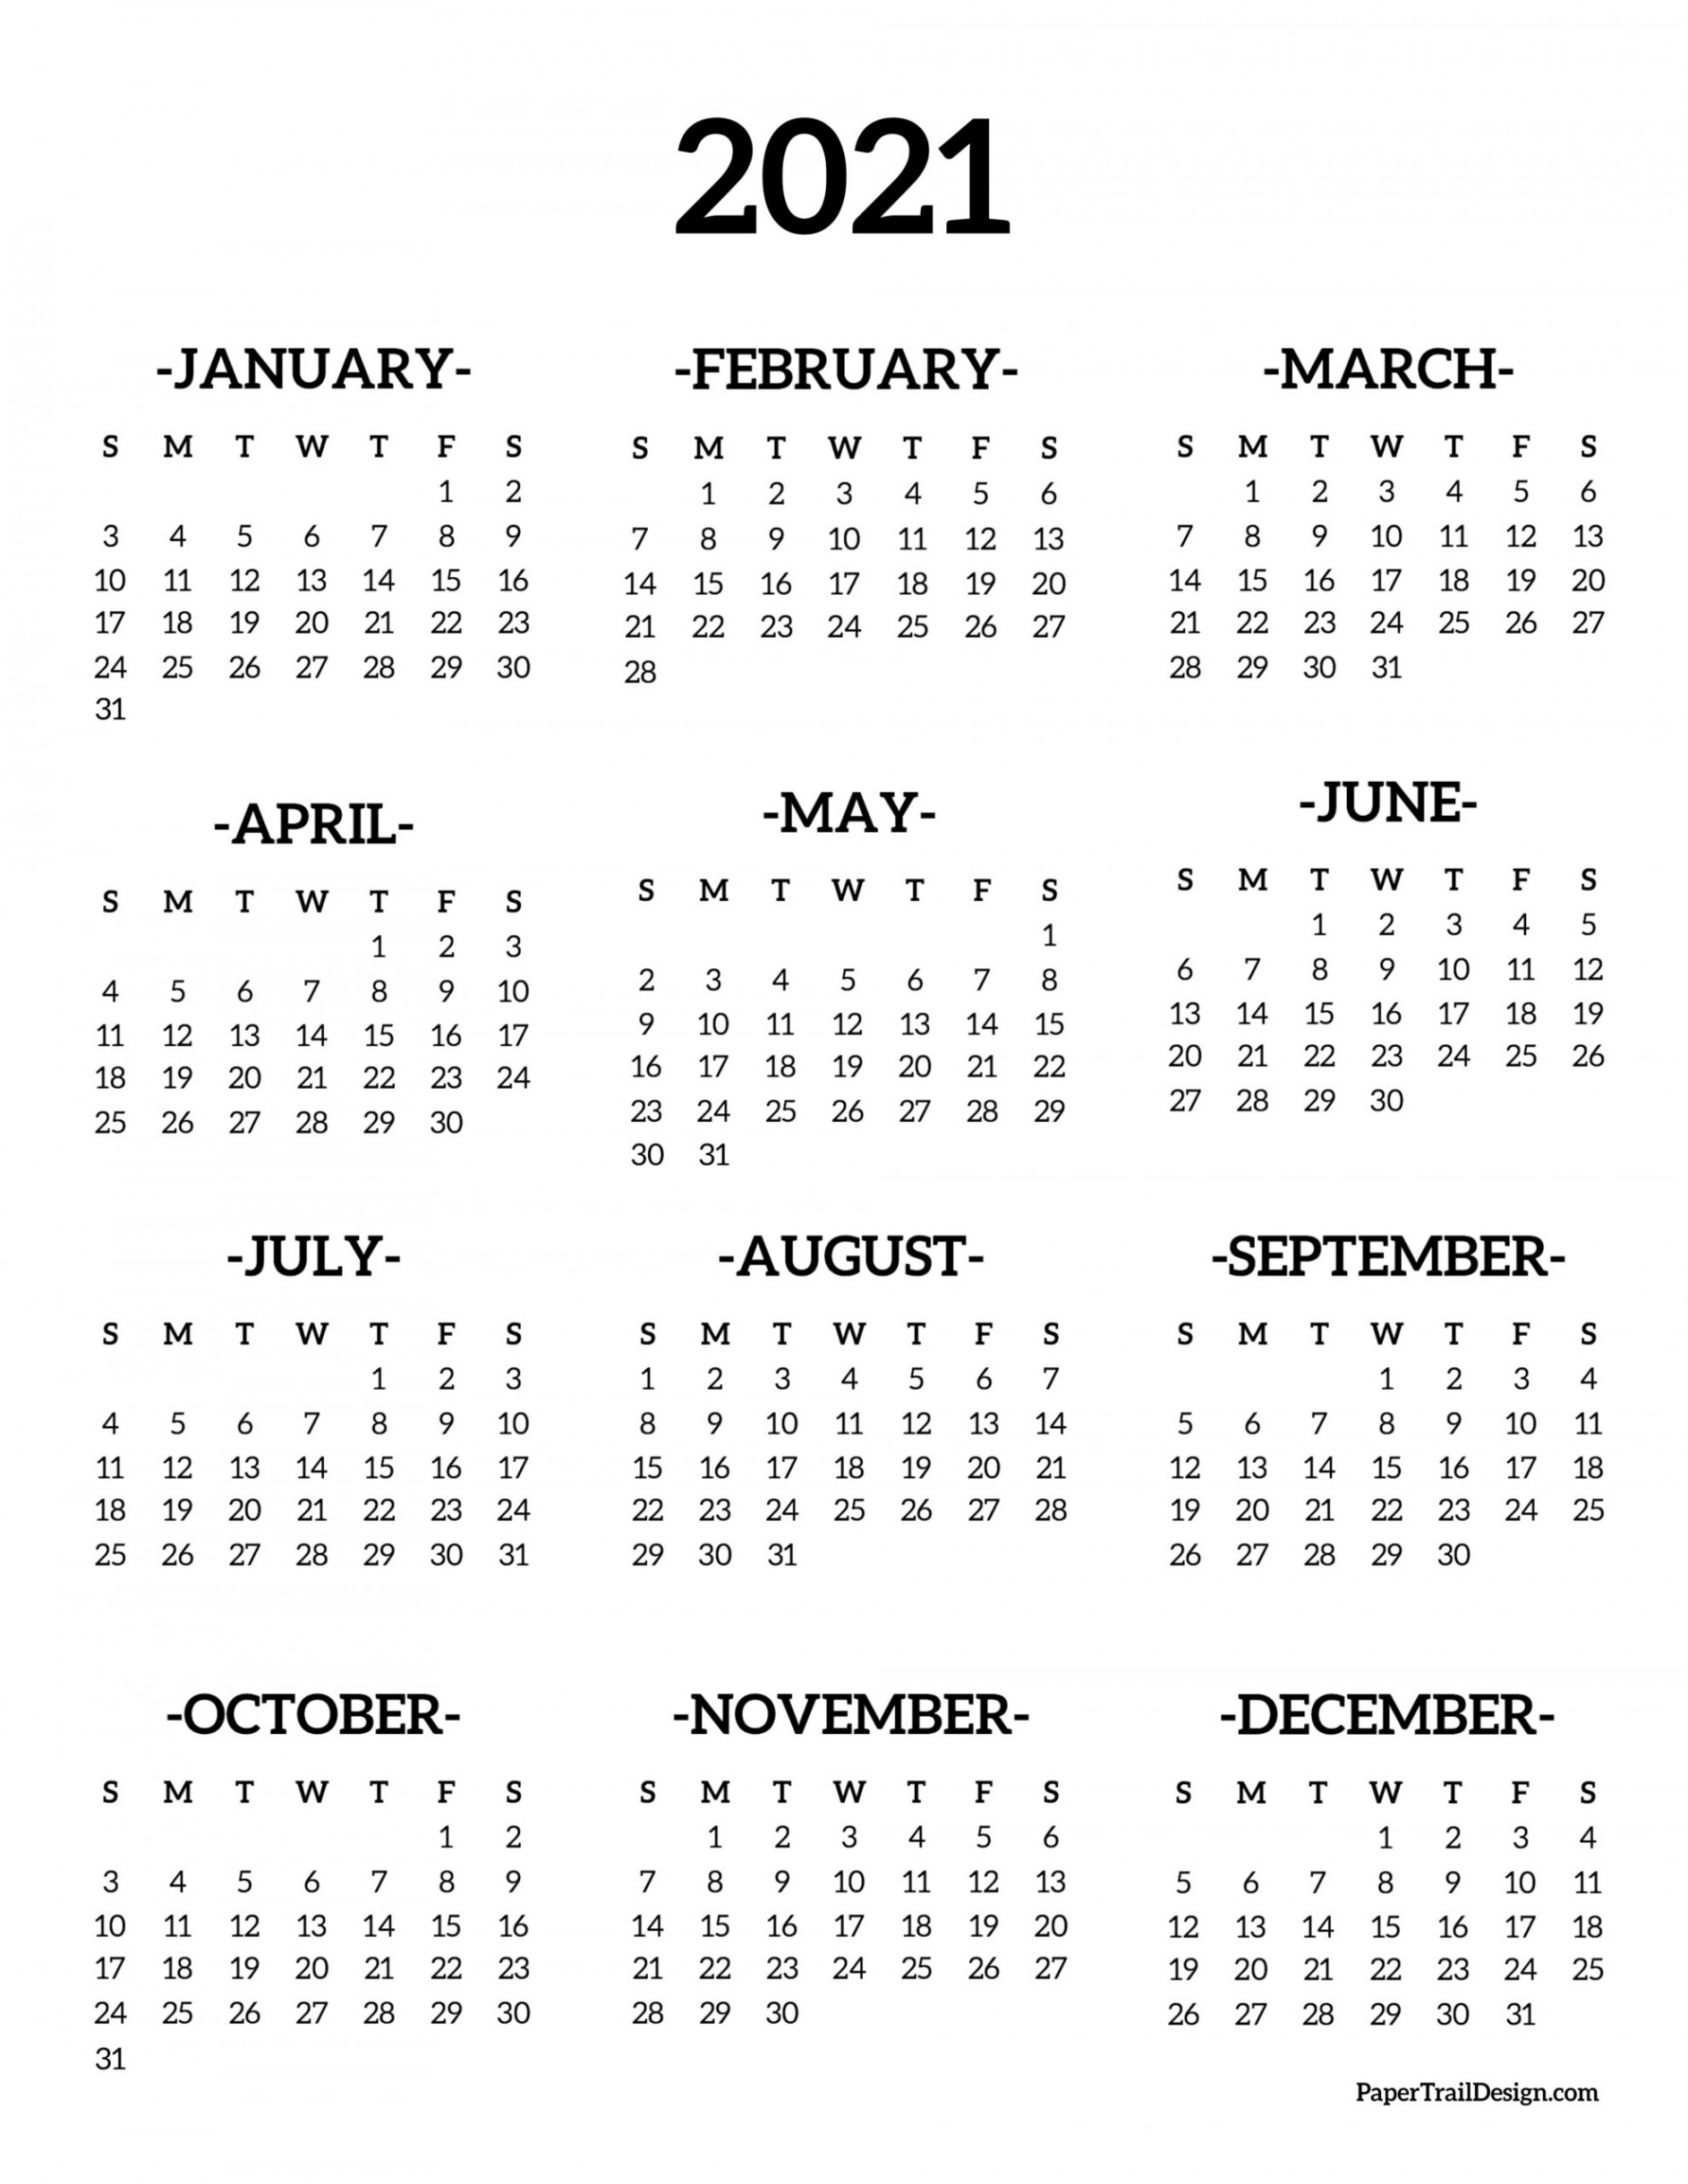 Calendar  Printable One Page - Paper Trail Design